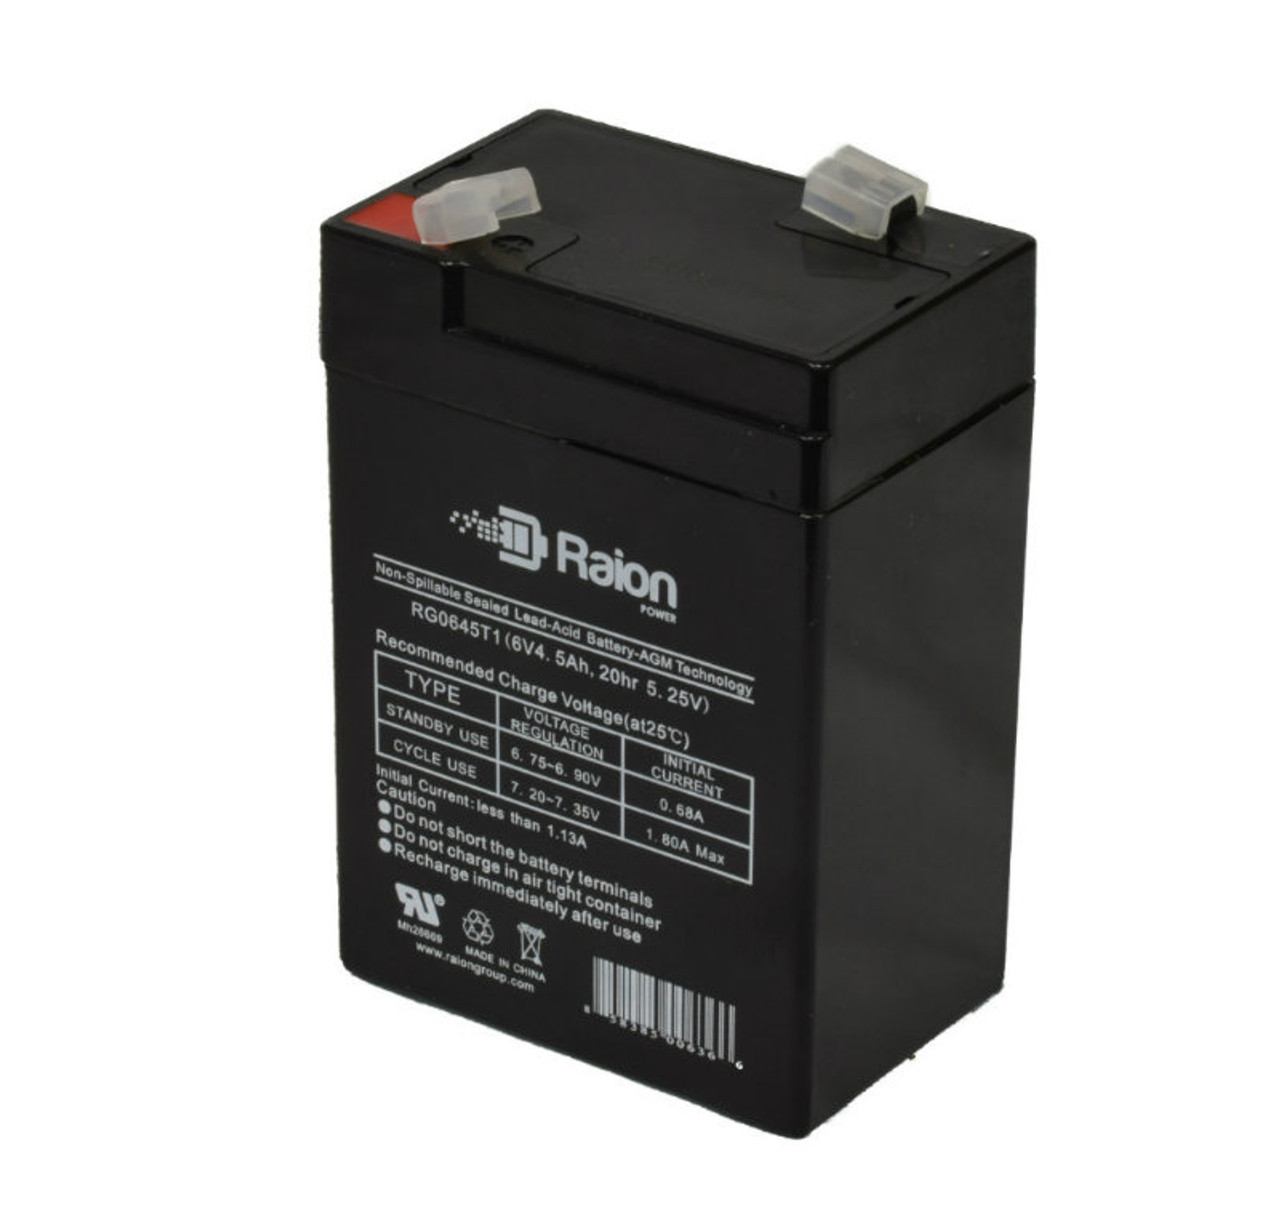 Raion Power RG0645T1 6V 4.5Ah Replacement Battery Cartridge for Kid Trax KT1504WM Rideamals Unicorn Toddler Ride-On